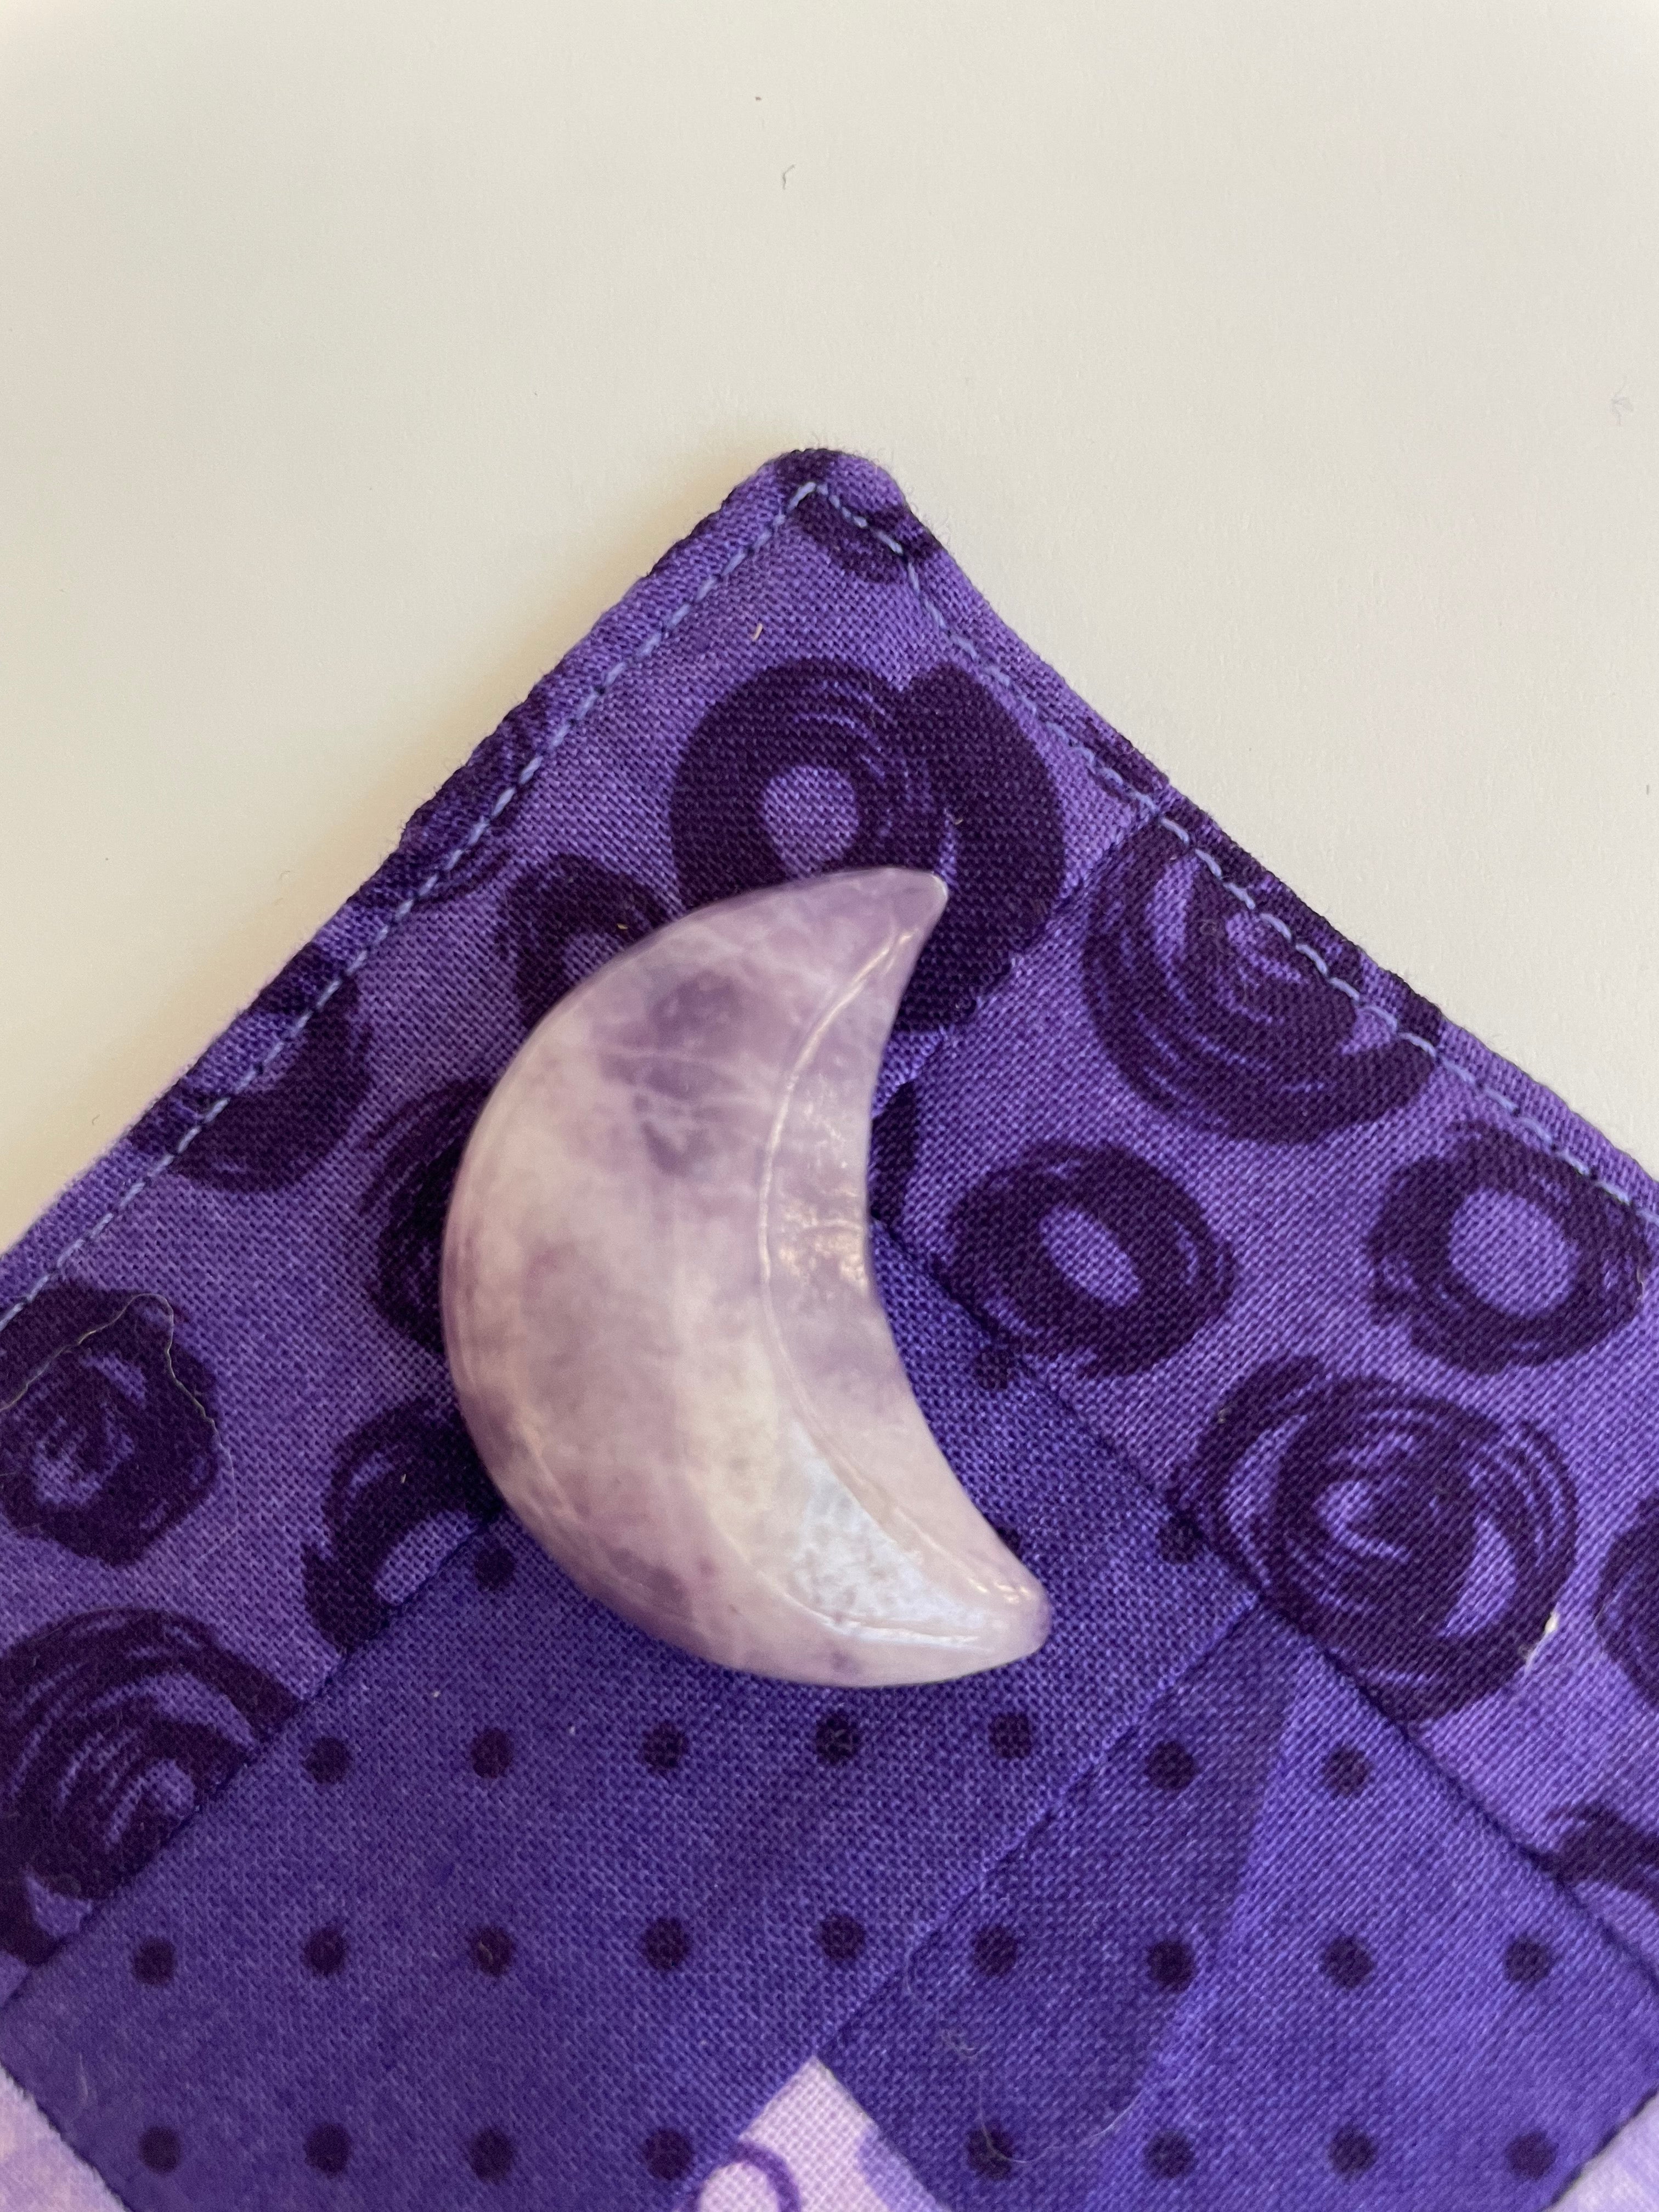 Reverse side of lepidolite crescent moon. ﻿This sparkly little lavender-colored lepidolite crescent moon can be used for meditation, healing, for your altar, on/near your computer or as décor for any room in your home or office. Easy to slip right into your pocket so you can take the energy of lepidolite everywhere you go. Approx. 1¼". Cost is $6.